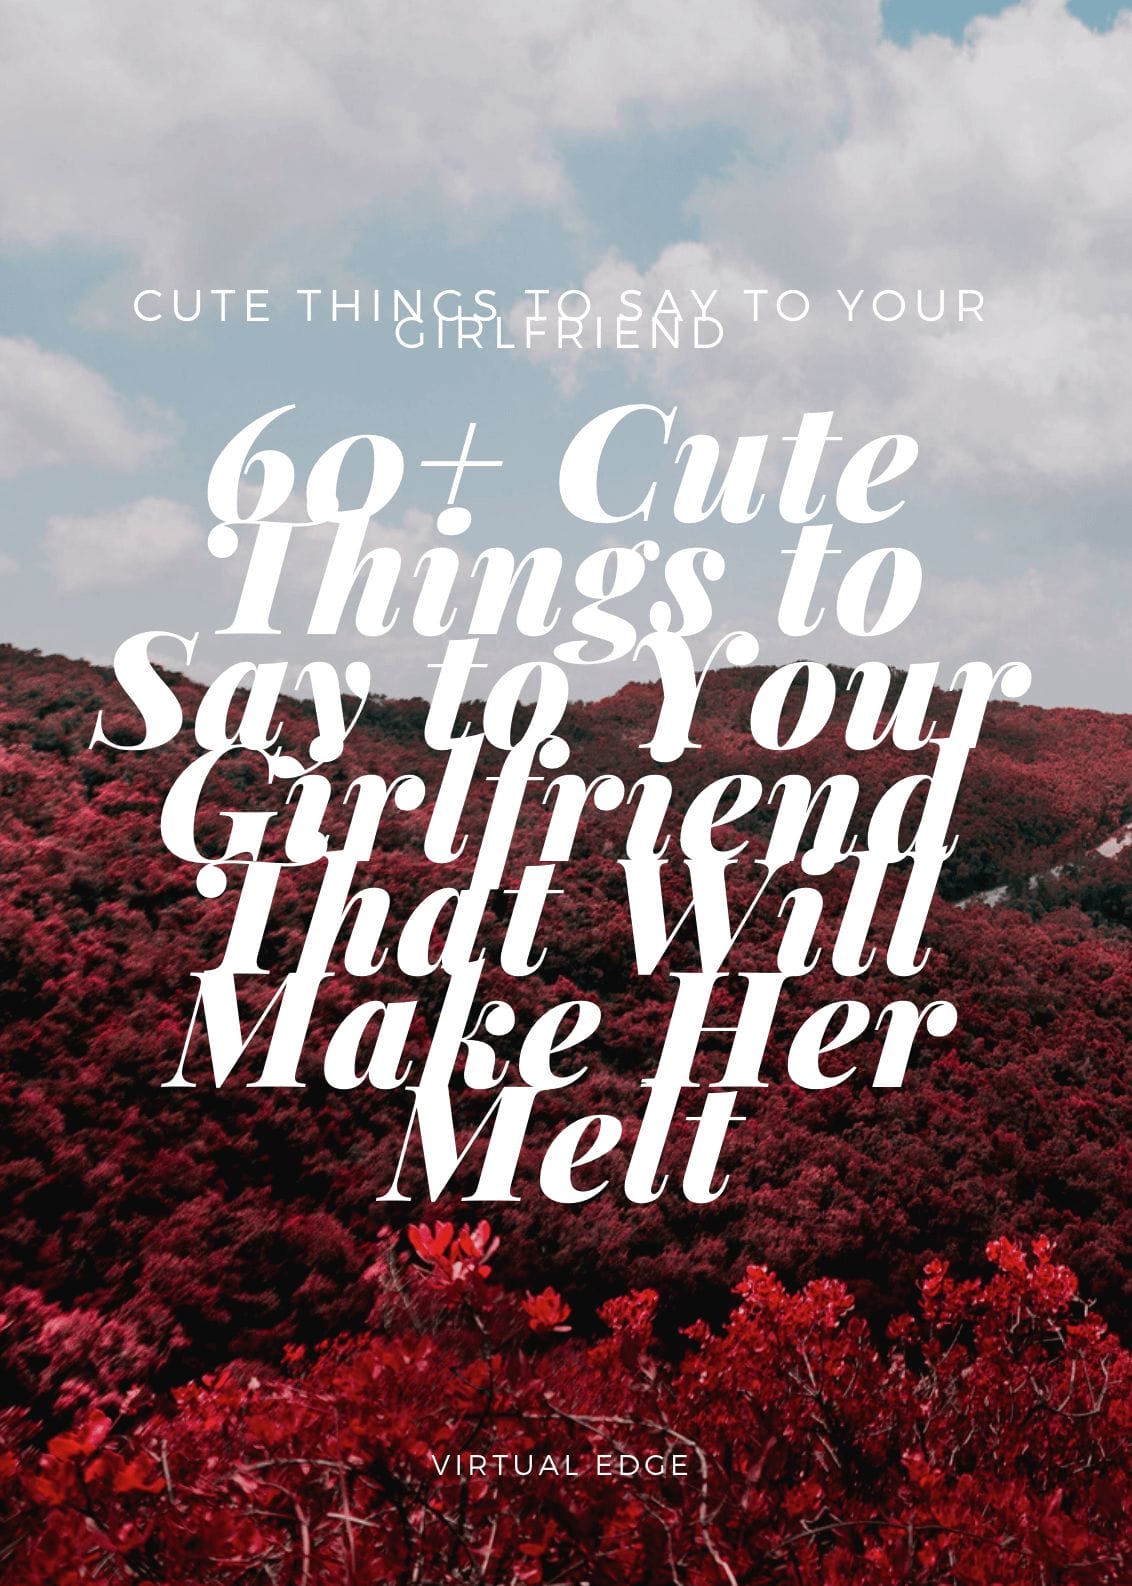 Things to say your girlfriend